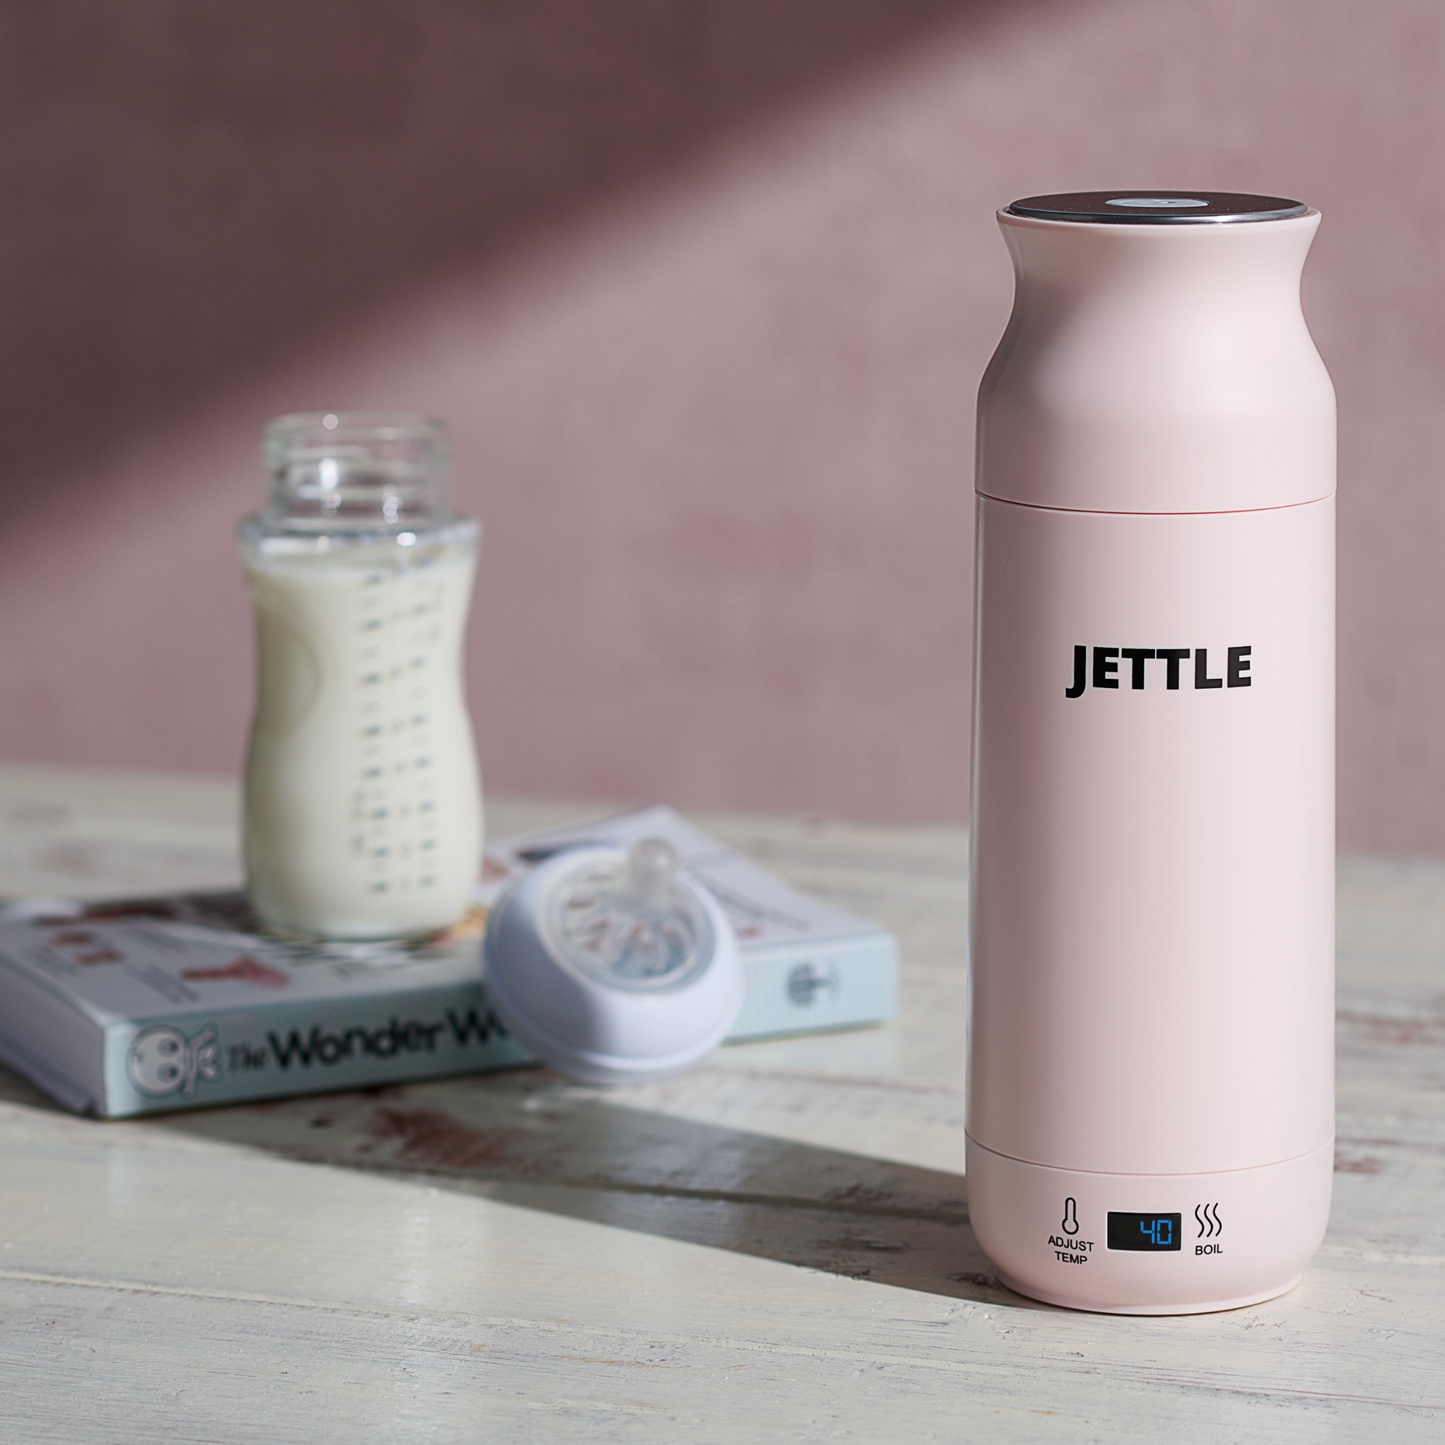 Jettle Electric Kettle - Travel Portable Heater for Coffee, Tea, Milk, Soup - Stainless Steel Travel Water Boiler tea pot with Temperature Control, LED, Automatic Power Off - 450ml, Kitchen Appliance